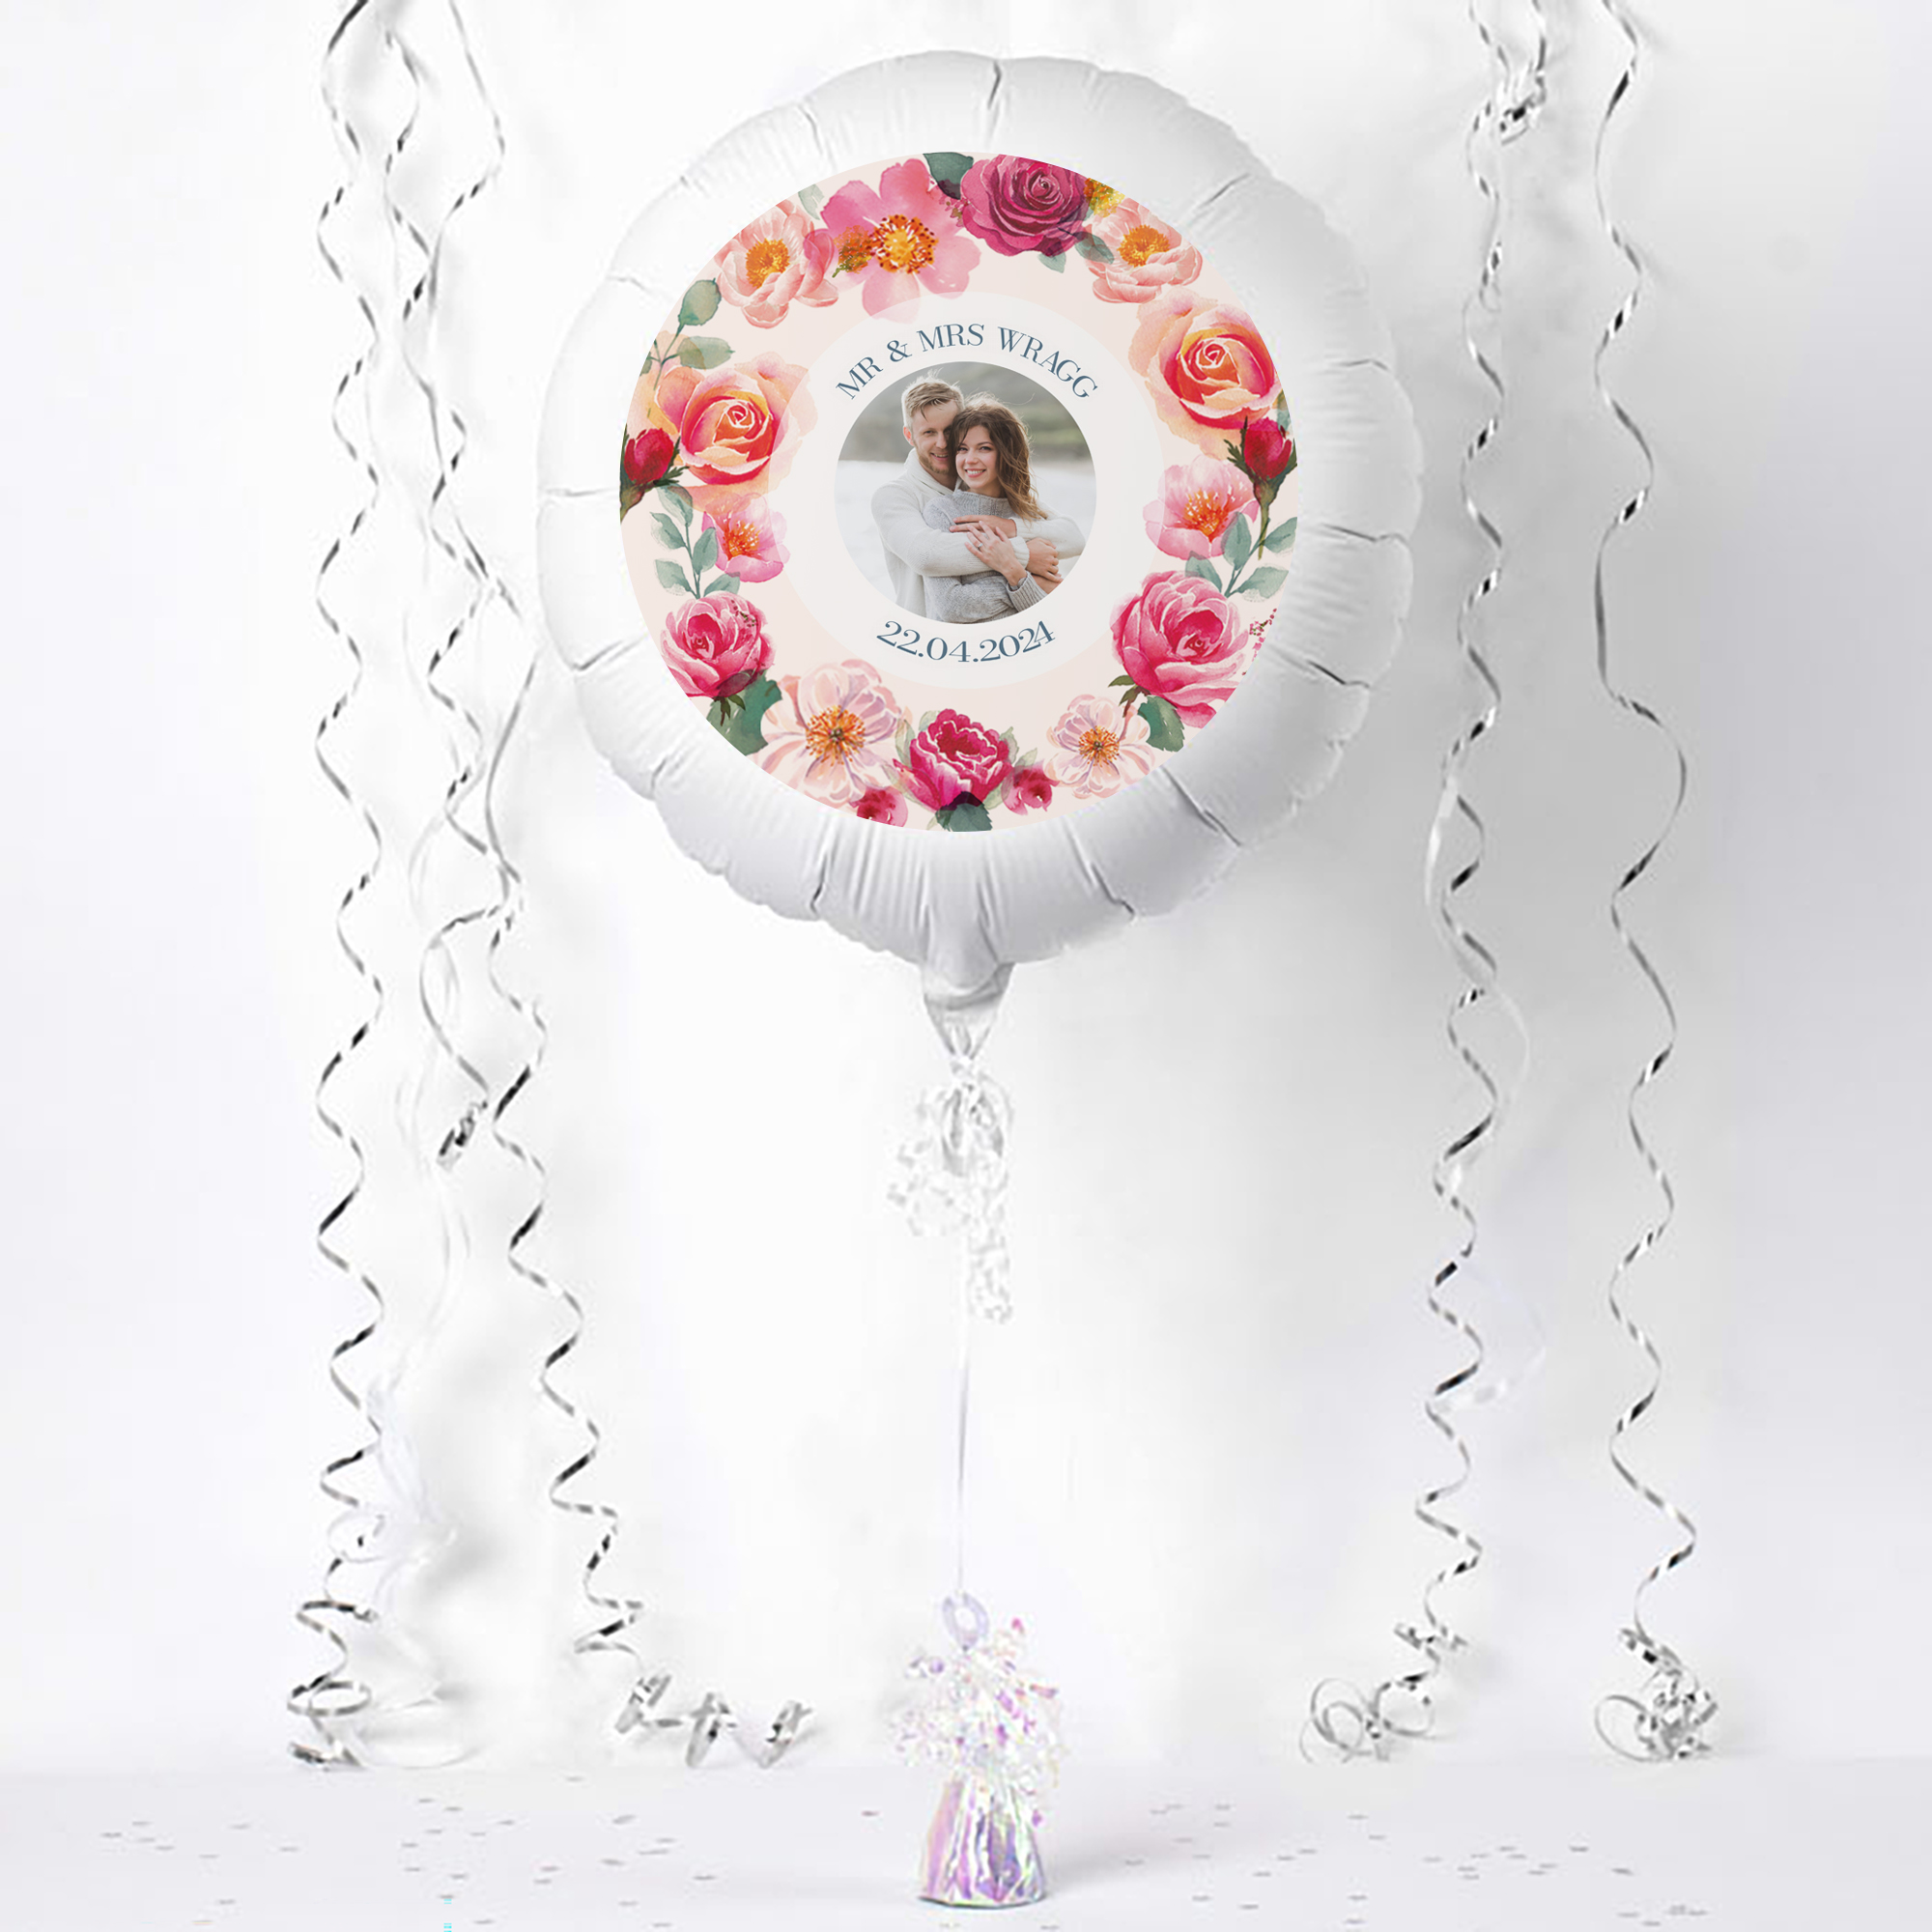 Photo Upload Balloon - Floral Border, Any Photo and Message